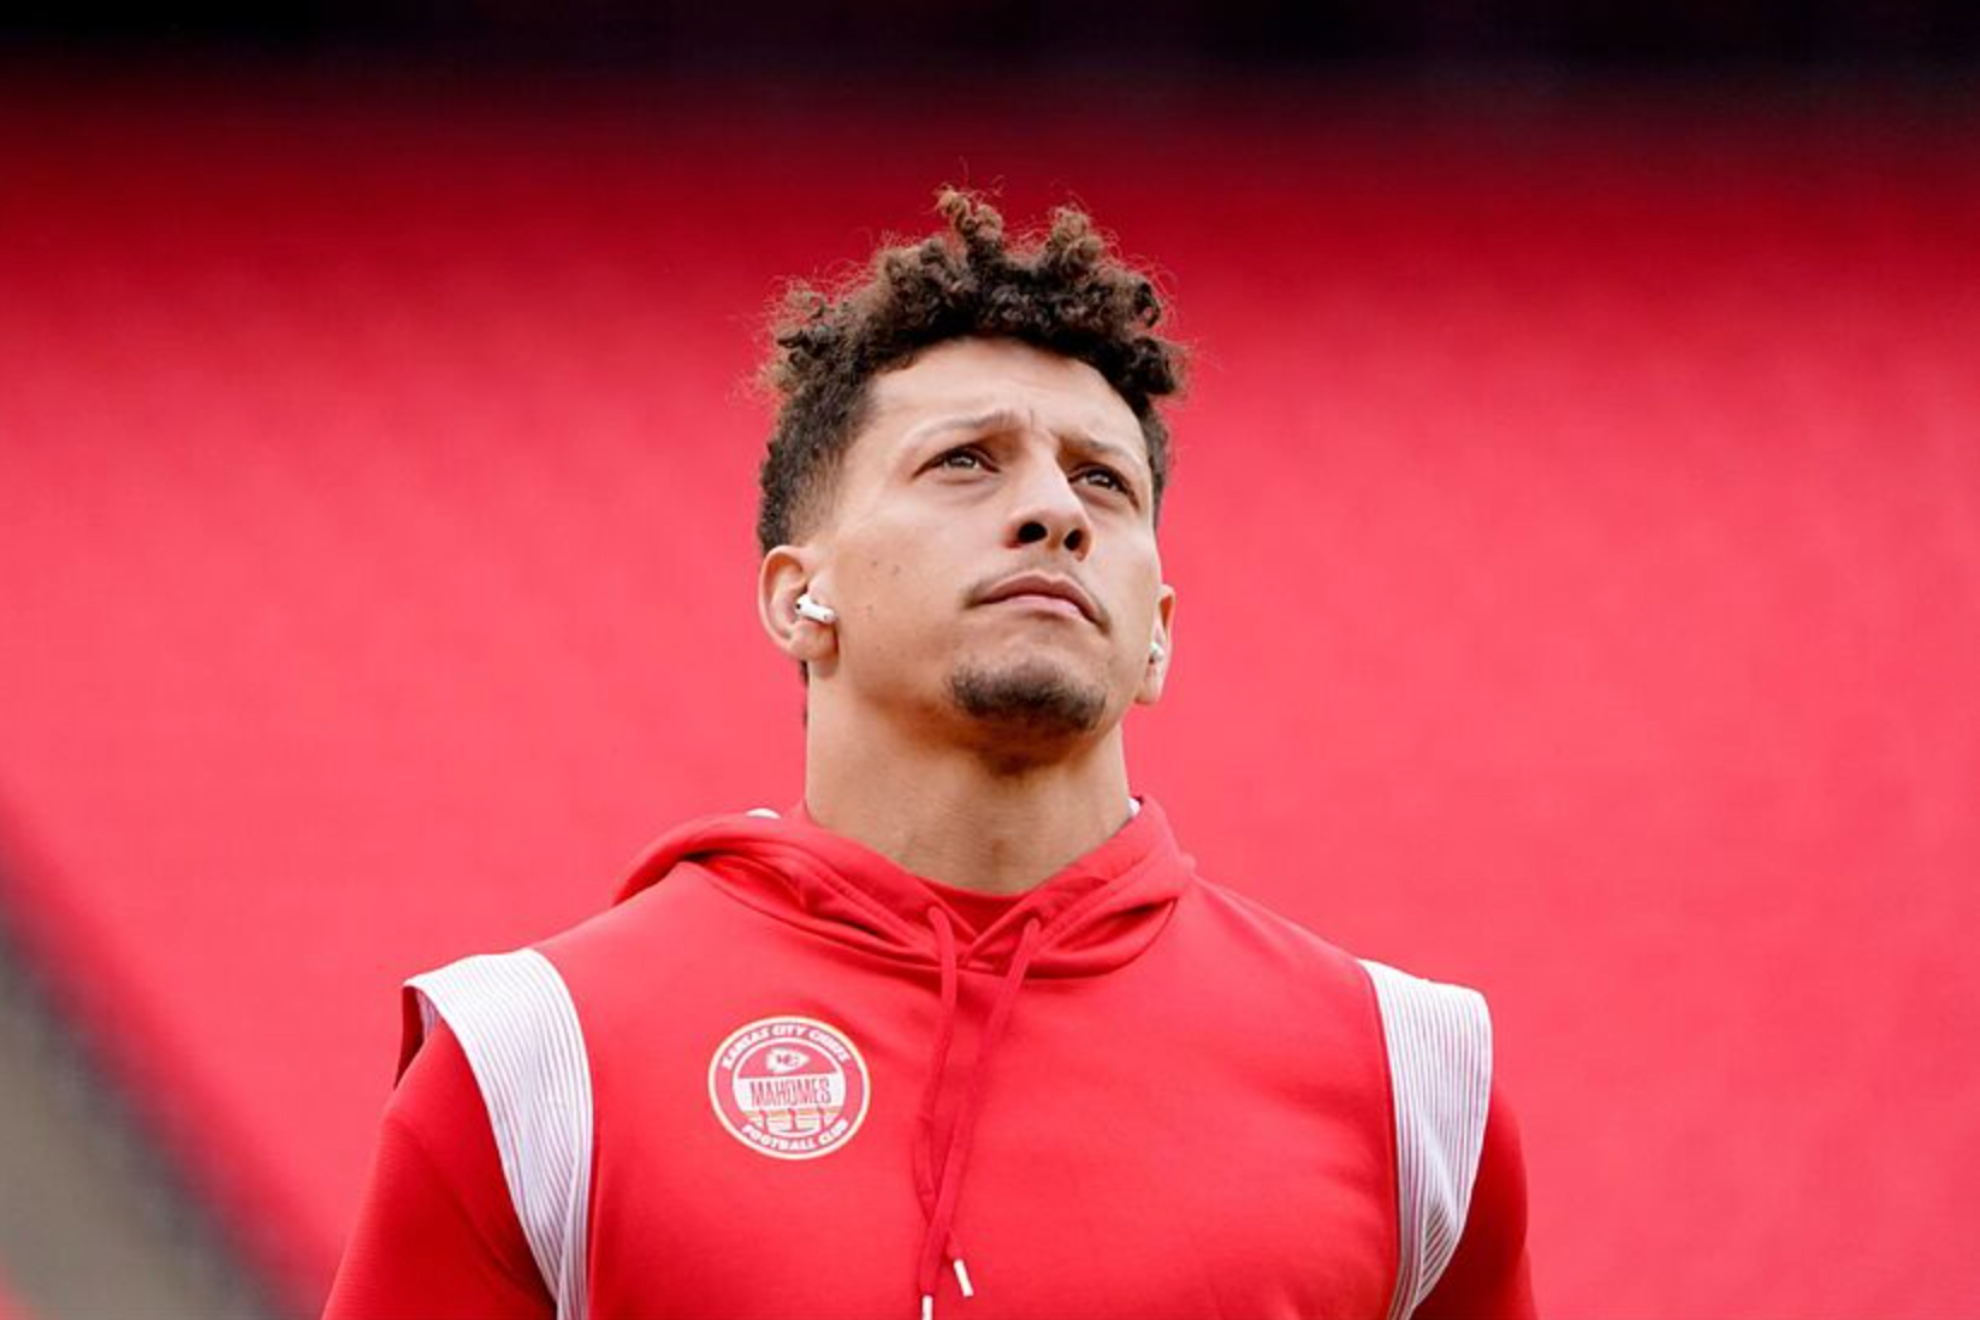 Patrick Mahomes gets the last laugh as he drafts the player the NFL wanted to humiliate him with to the Chiefs